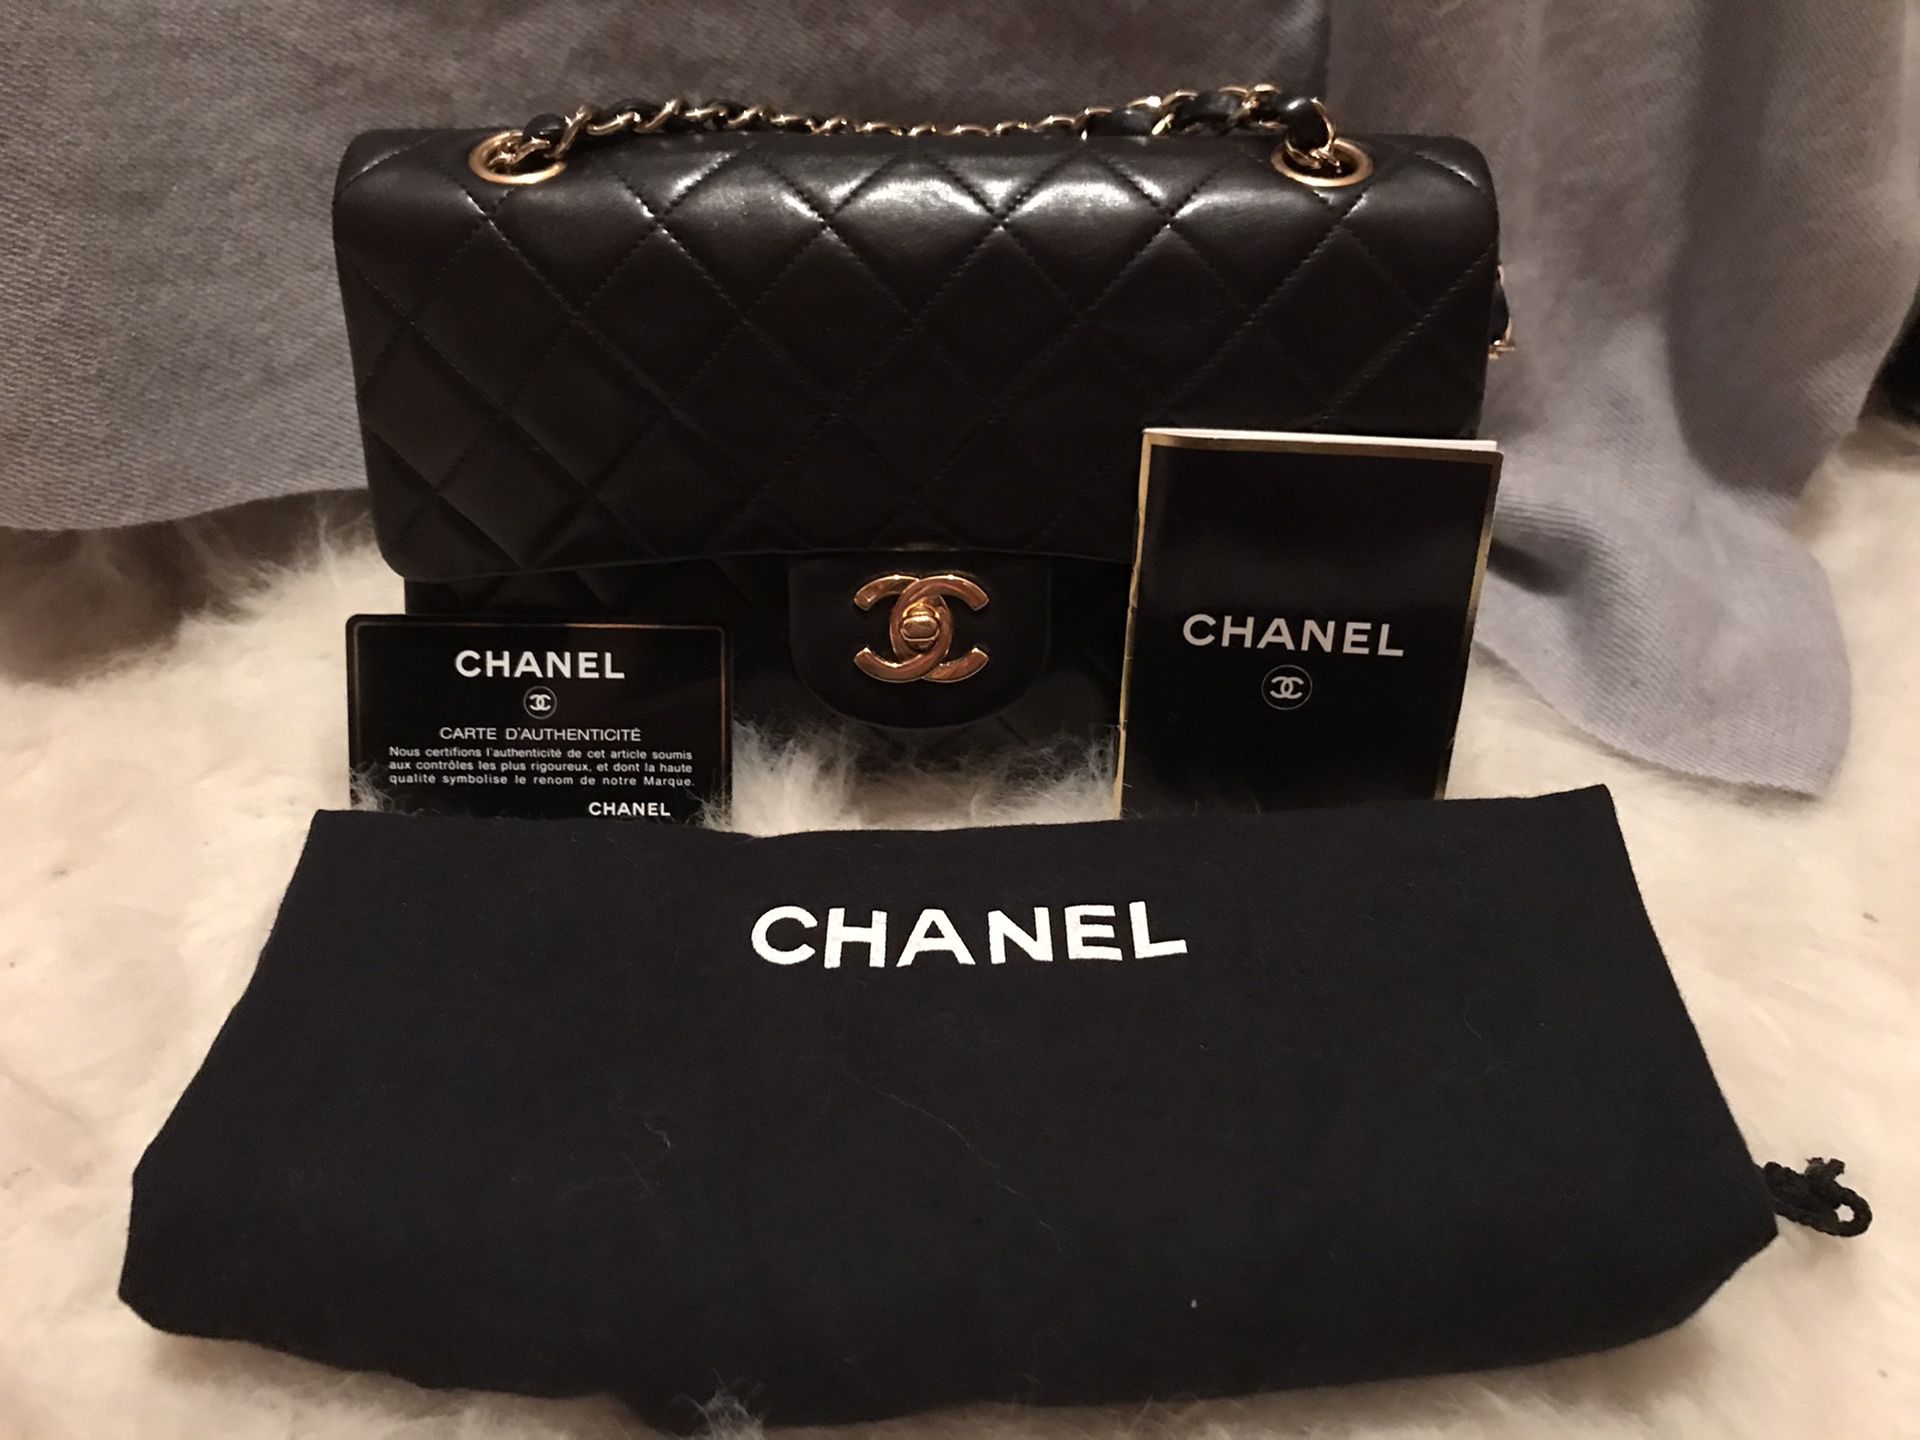 Authentic Chanel classic